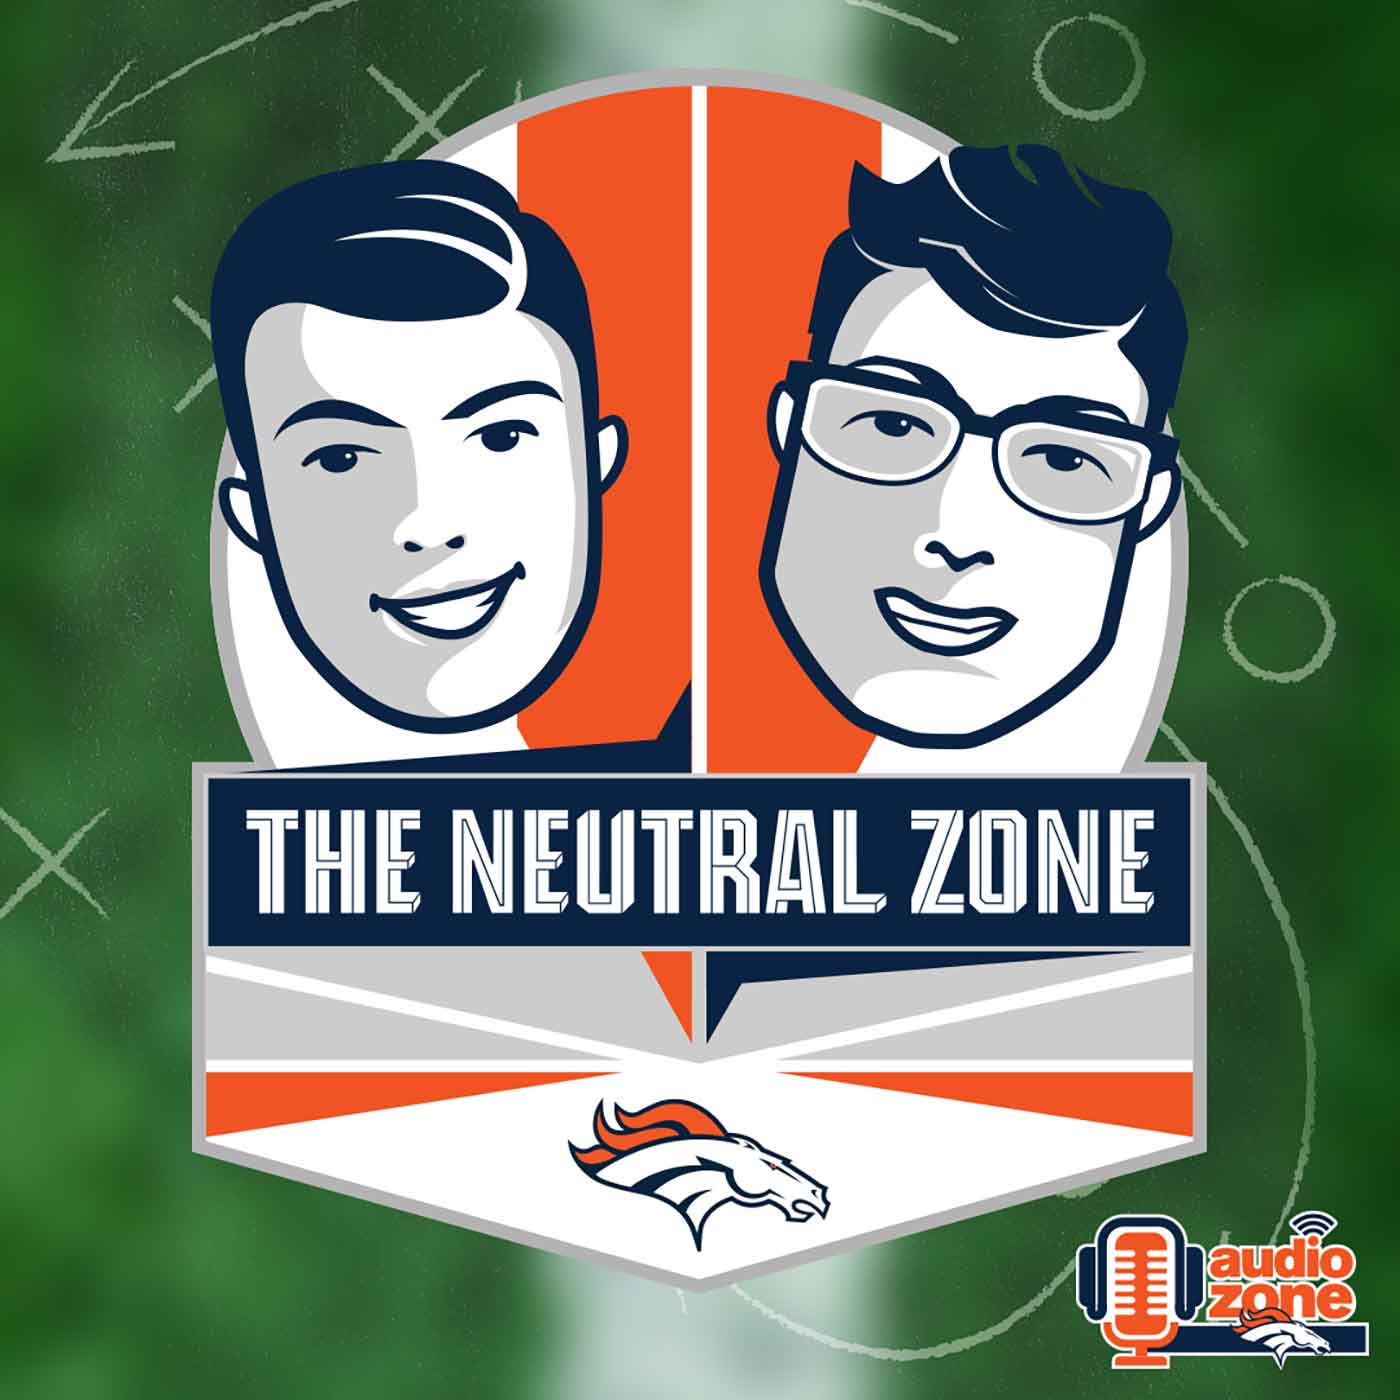 The Neutral Zone: How recent AFC West coaching moves impact the Broncos